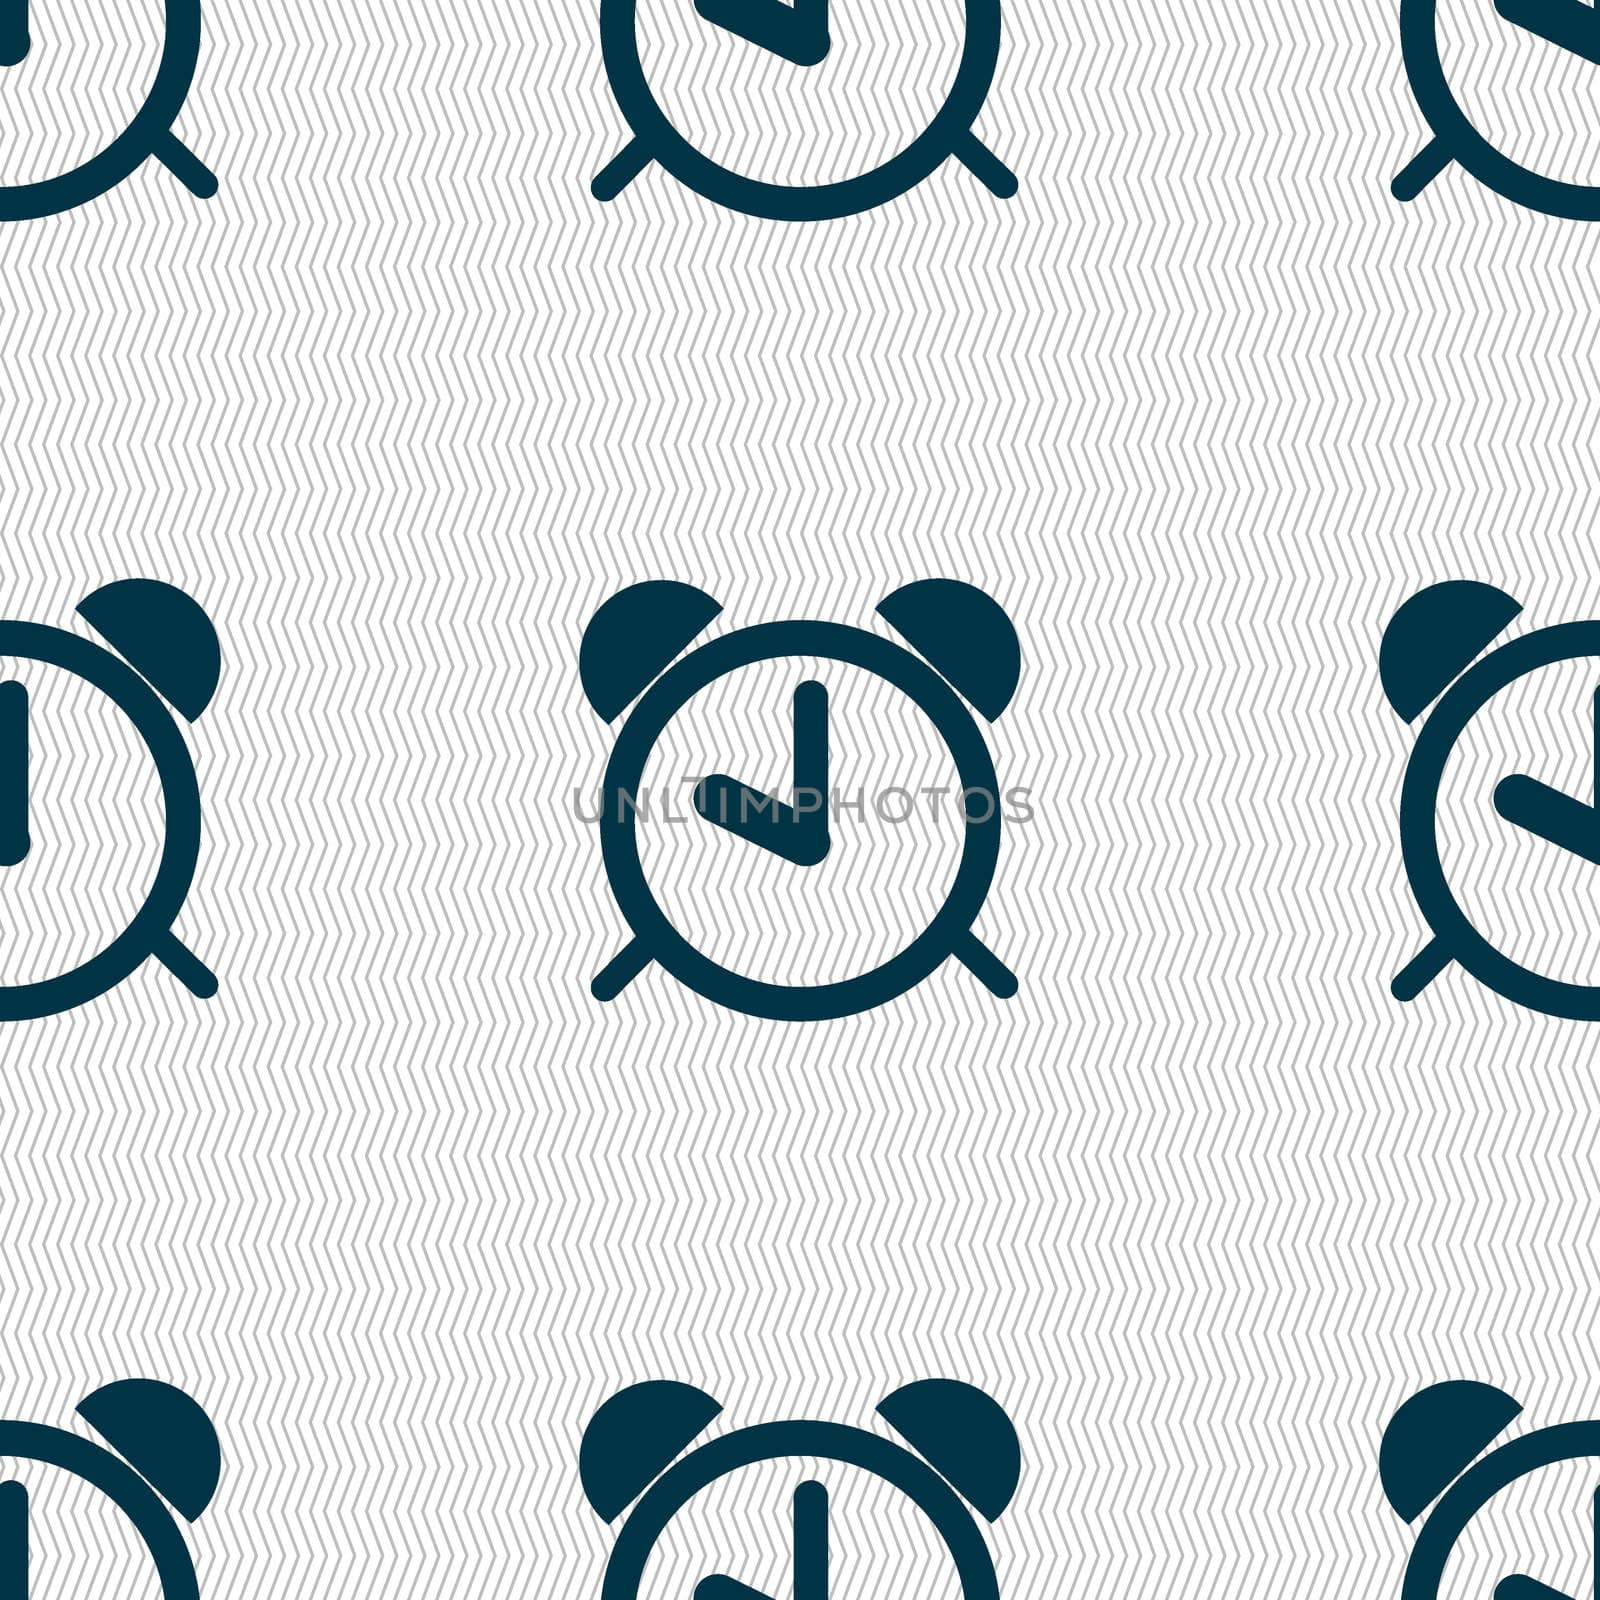 Alarm clock sign icon. Wake up alarm symbol. Seamless abstract background with geometric shapes.  by serhii_lohvyniuk